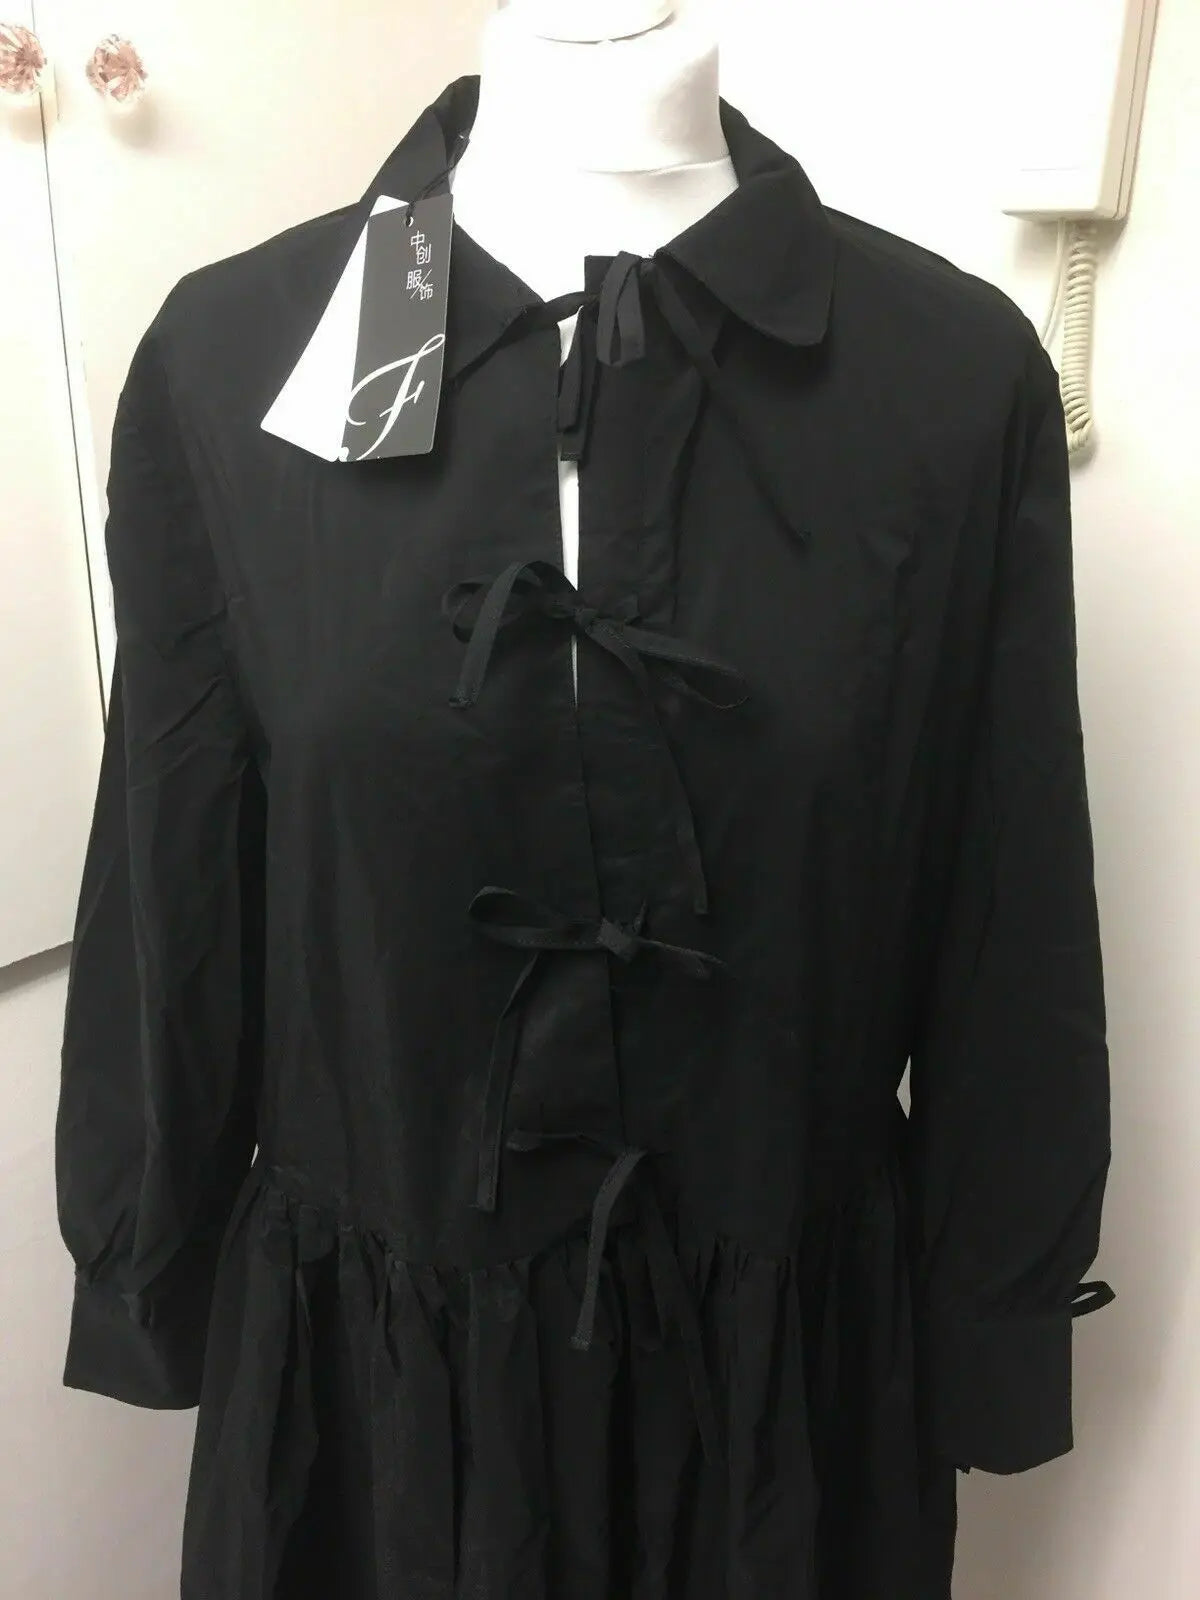 NEW Black Gothic Oversized Dress WITH TIES. UNUSUAL. COTTON Unbranded